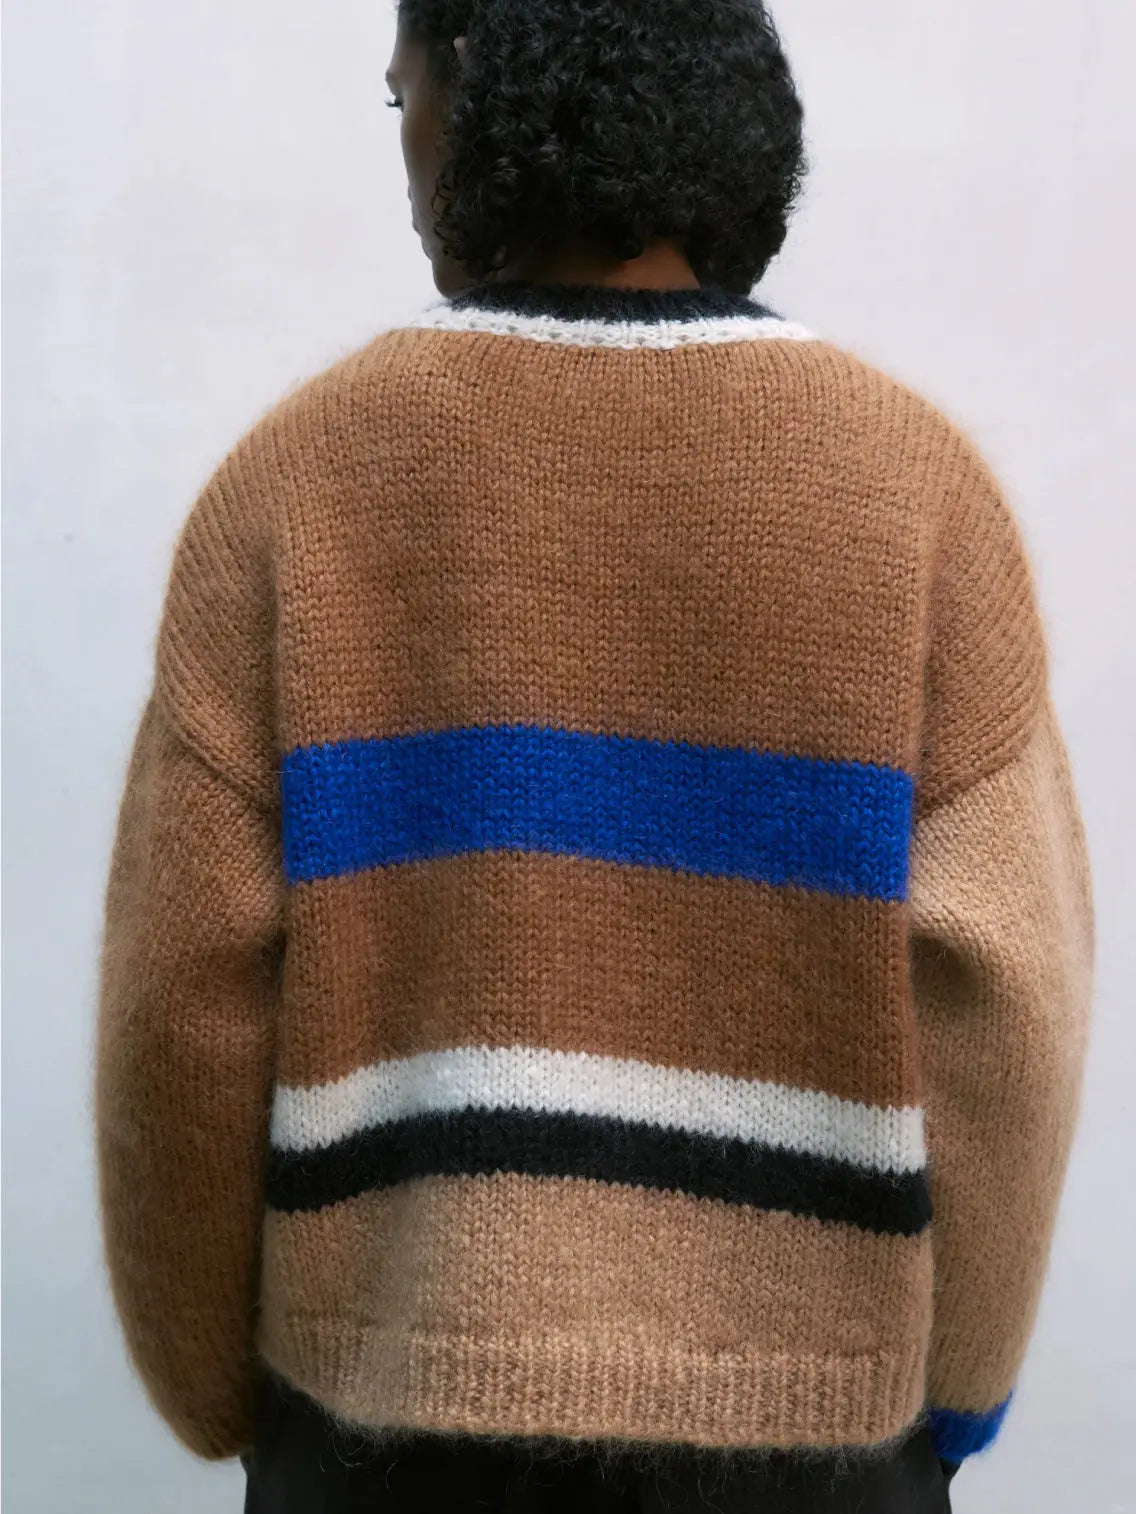 A Mohair Striped Sweater from Cordera featuring a brown base with wide horizontal stripes in blue, white, and black across the chest. The long sleeves and body have a loose, boxy fit, and there is black trim around the neckline. The garment is laid flat against a white background, ready for your wardrobe in Barcelona.